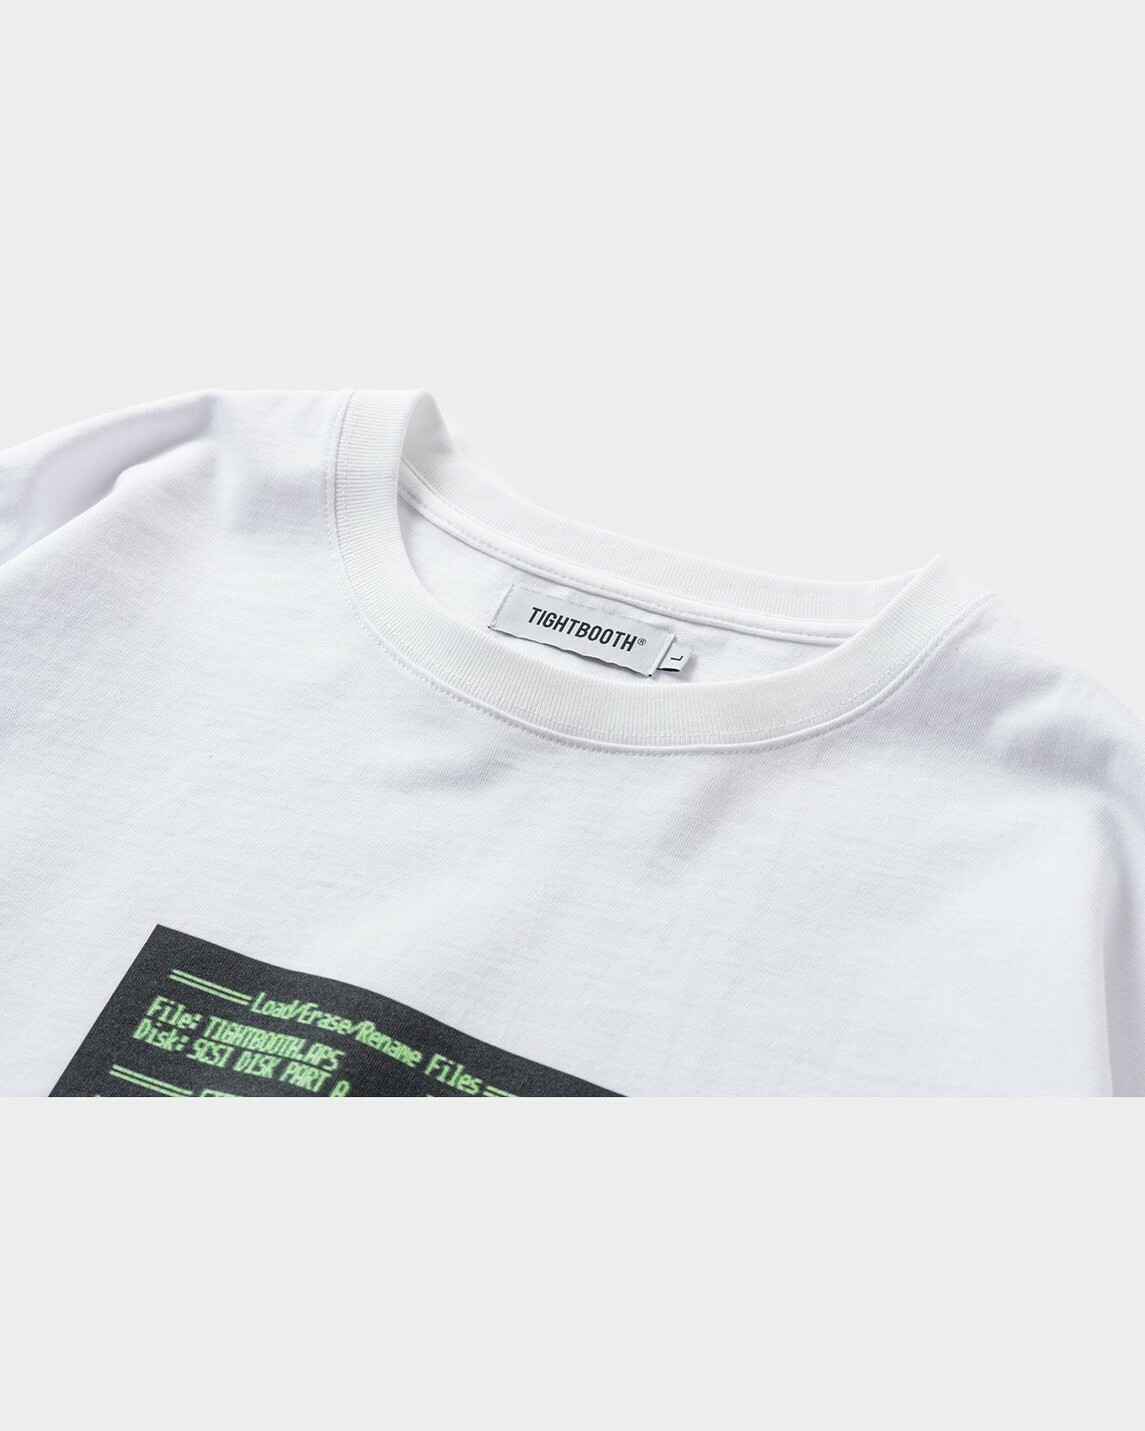 TIGHTBOOTH - MPC3000 T-SHIRT / 2COLORS